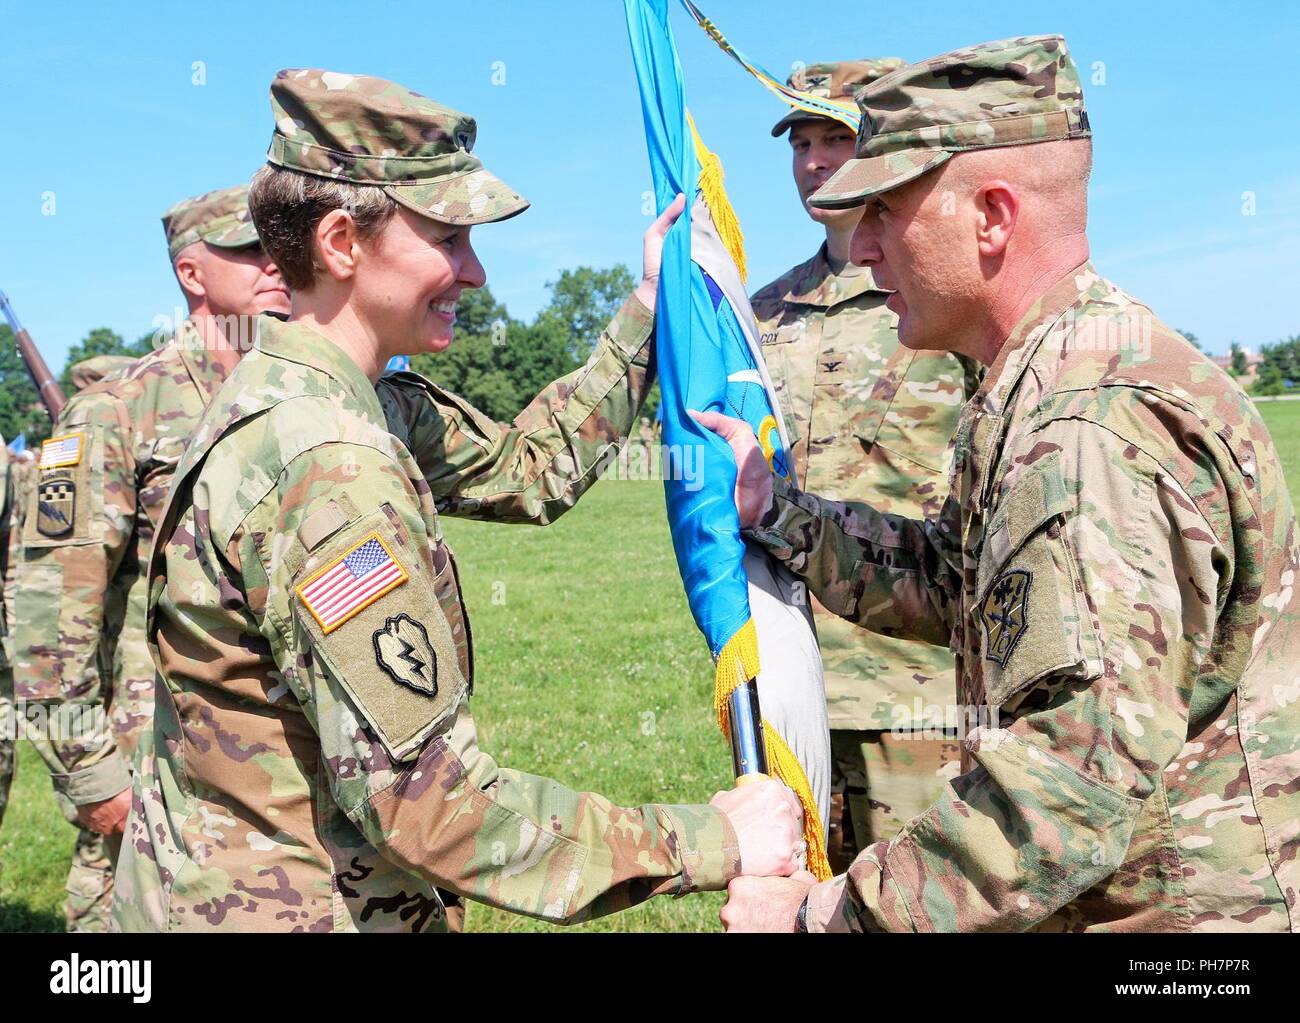 (Right) Maj. Gen. Gary W. Johnston, commanding general, U.S. Army Intelligence and Security Command passes the brigade colors to Col. Heidi A. Urben the new 704th Military Intelligence Brigade commander, during a change of command ceremony, at Fort Meade’s parade field, Fort Meade, Maryland, June 26, 2018. Urben assumed command of the 704th Military Intelligence Brigade, from the outgoing commander, Col. Rhett R. Cox. ( Stock Photo